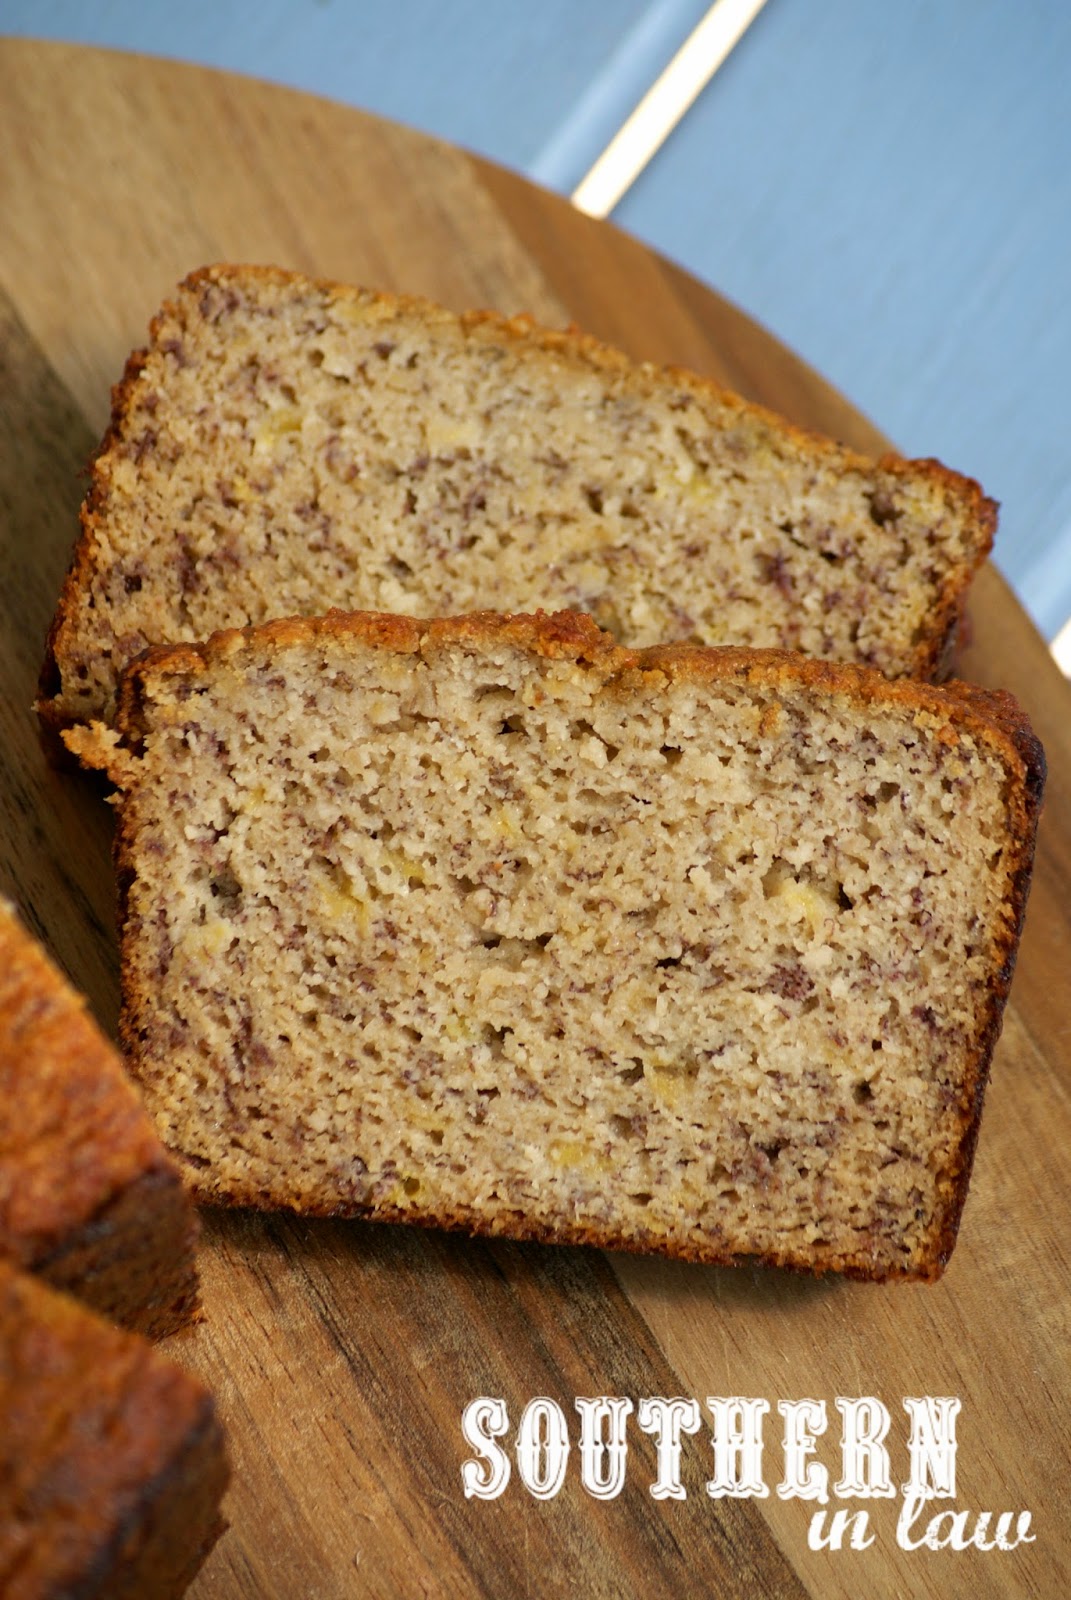 Our Green House Blog: Paleo Banana Bread {nut and grain free!}